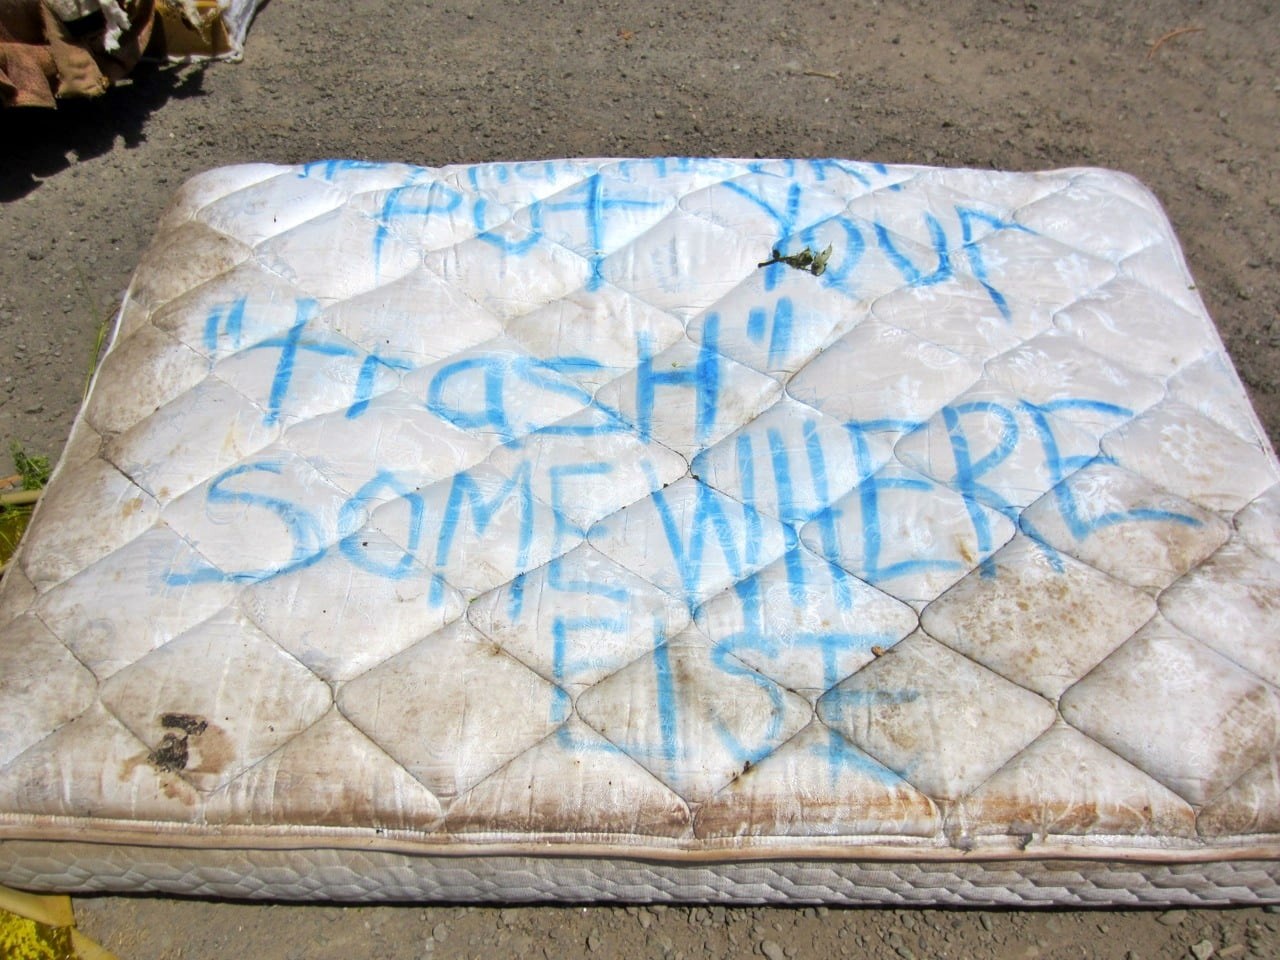 What To Do With My Old Mattress